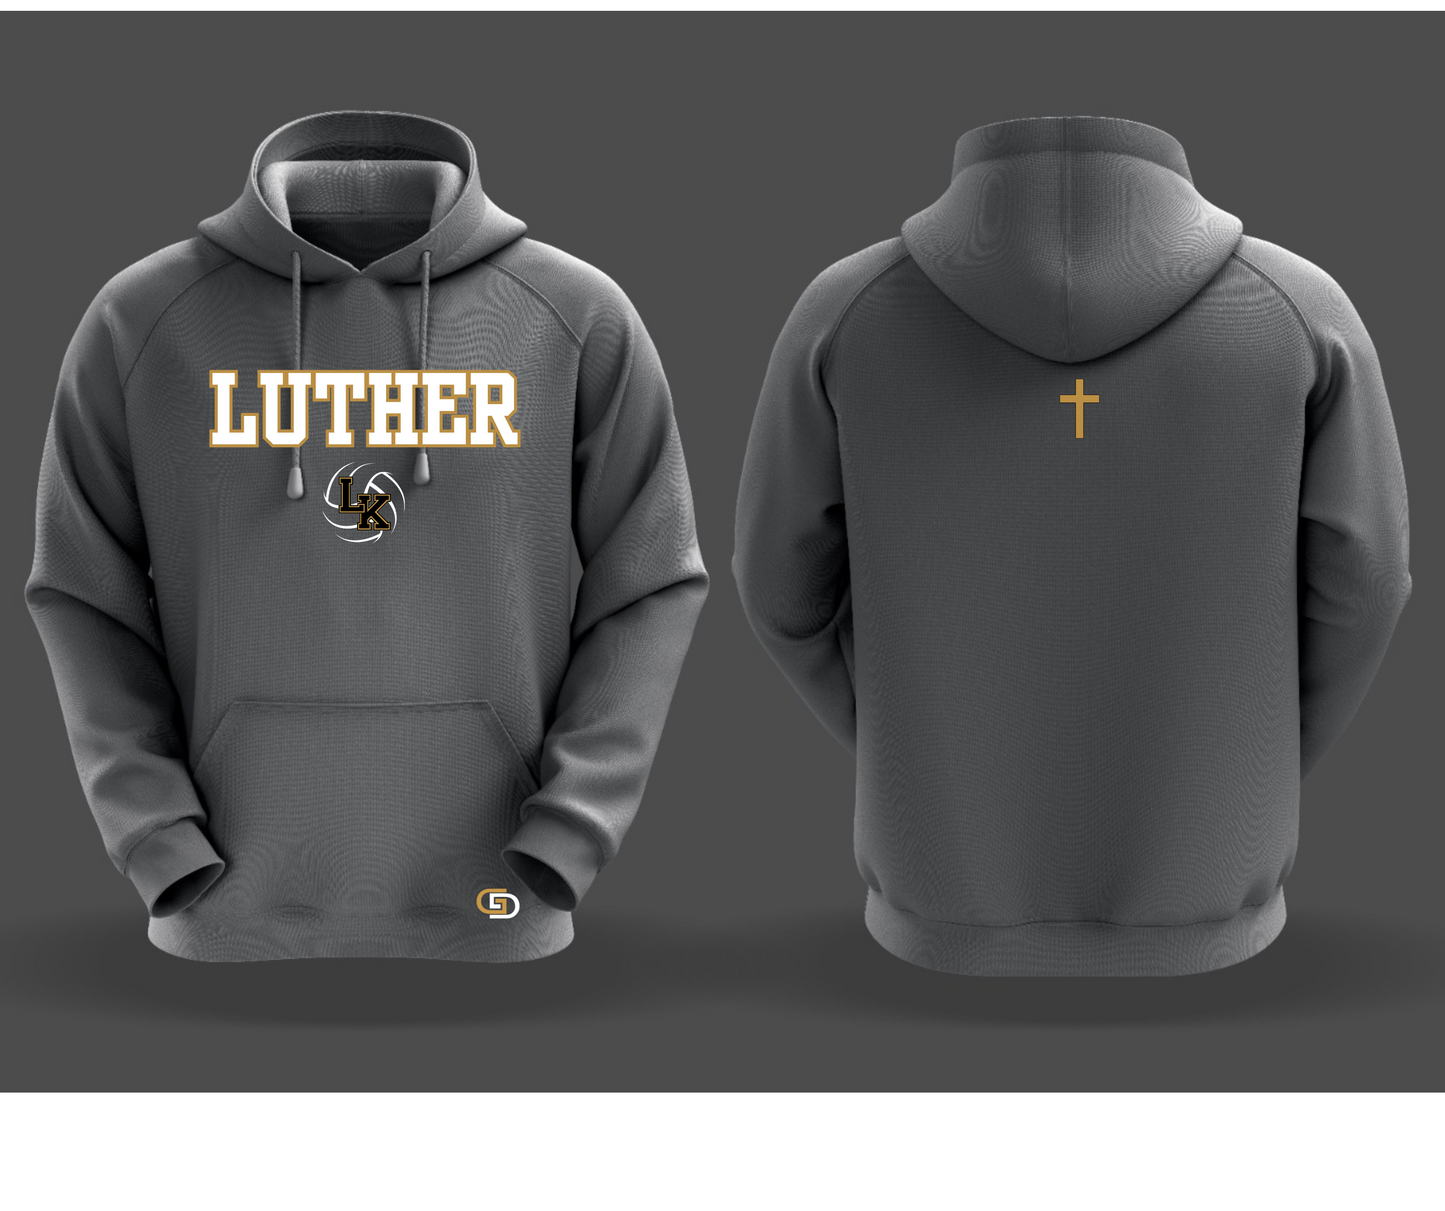 LUTHER VOLLEYBALL HOODIE